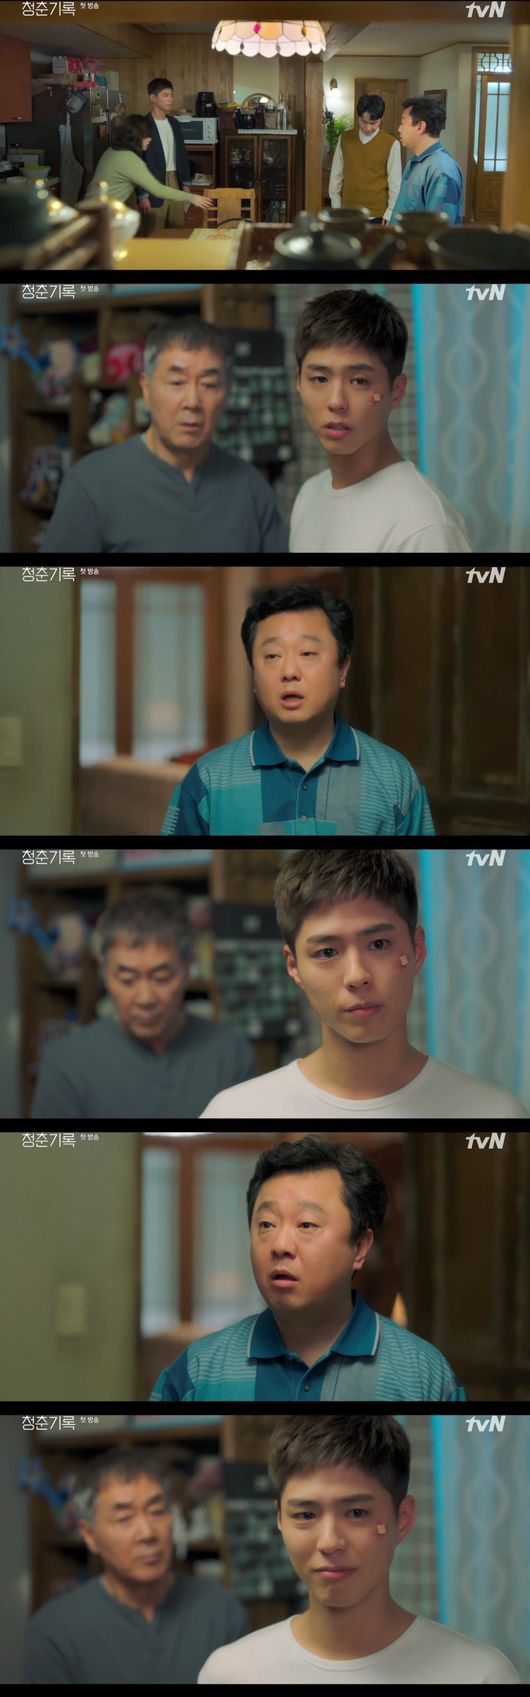 Park Bo-gum was shocked by the fact that he was a worstball for his family.On TVN Record of Youth broadcast on the 7th, Park Bo-gum met his steam fan, Park So-dam, while he was shocked by the evaluation of his family surrounding him.Sa Hye-joon had a dream of turning from model to actor, ITZY was not easy, and eventually he could not get the right role and he went to Alba.While playing the alba, Sa Hye-joon was offered the position of manager of the store, but he refused. Sa Hye-joon met Kim Jin-woo (Kwon Soo-hyun) and Won Hae-hyo (Byeon Woo-seok).Then Won Hae-hyos brother, Won Hae-na (Jo Yu-jung), pulled the car and took Kim Jin-woo (Kwon Soo-hyun).Sa Hye-joon was born as a gold spoon and was recognized more than himself. He said, I am constantly being attacked. To reality.If we dont do this, were going to go to the army. Then, he told Won Hae-hyo, If we change, we lose innocence.After a tired day, she went home. Her mother, Han Ae-sook (Ha Hee-ra), gave her a letter of admission from the Military Manpower Administration.If it works, I think it is an opportunity given by heaven and I will postpone it once. So, my brother, Sa Kyung-joon (Lee Jae-won), said, I have to go anyway, but just go quickly. My mother knows that she is a woof in my house, and ITZY is not it.Is it a family evaluation? My brother is also a personality when I look at my standards, said Sa Hye-joon, who was shocked by the words But his father, Lingnan (Park Soo-young), was angry when he found out that Sa Hye-joon had received a notice of his admission.When you look at your grandfather, you were just young, said Lingnan, looking at his grandfather and Sa Hye-joon.My father said, If I do not get the money I collected and I do not buy it, I will not live like this. But my grandfather told Sa Hye-joon, So I do not live without talking.My house is not Hyejun, but I am. On the other hand, Sa Hye-joon stood at the Homme stage fashion show.After choosing the way of a makeup artist while attending a large company, he was a long-time fan of Sa Hye-joon, who is working as an assistant, and was excited to meet him, but while working, he tried not to show his feelings.However, because of the stable Sa Hye-joon and Won Hae-hyo, the senior designer was confused and hid alone and burst into tears. However, when I saw the picture of Sa Hye-joon, he said, I am happy because I am your fan.At that time, Sa Hye-joon asked, Was it my fan? The two had an extraordinary first meeting: TVN Record of Youth broadcast capture.